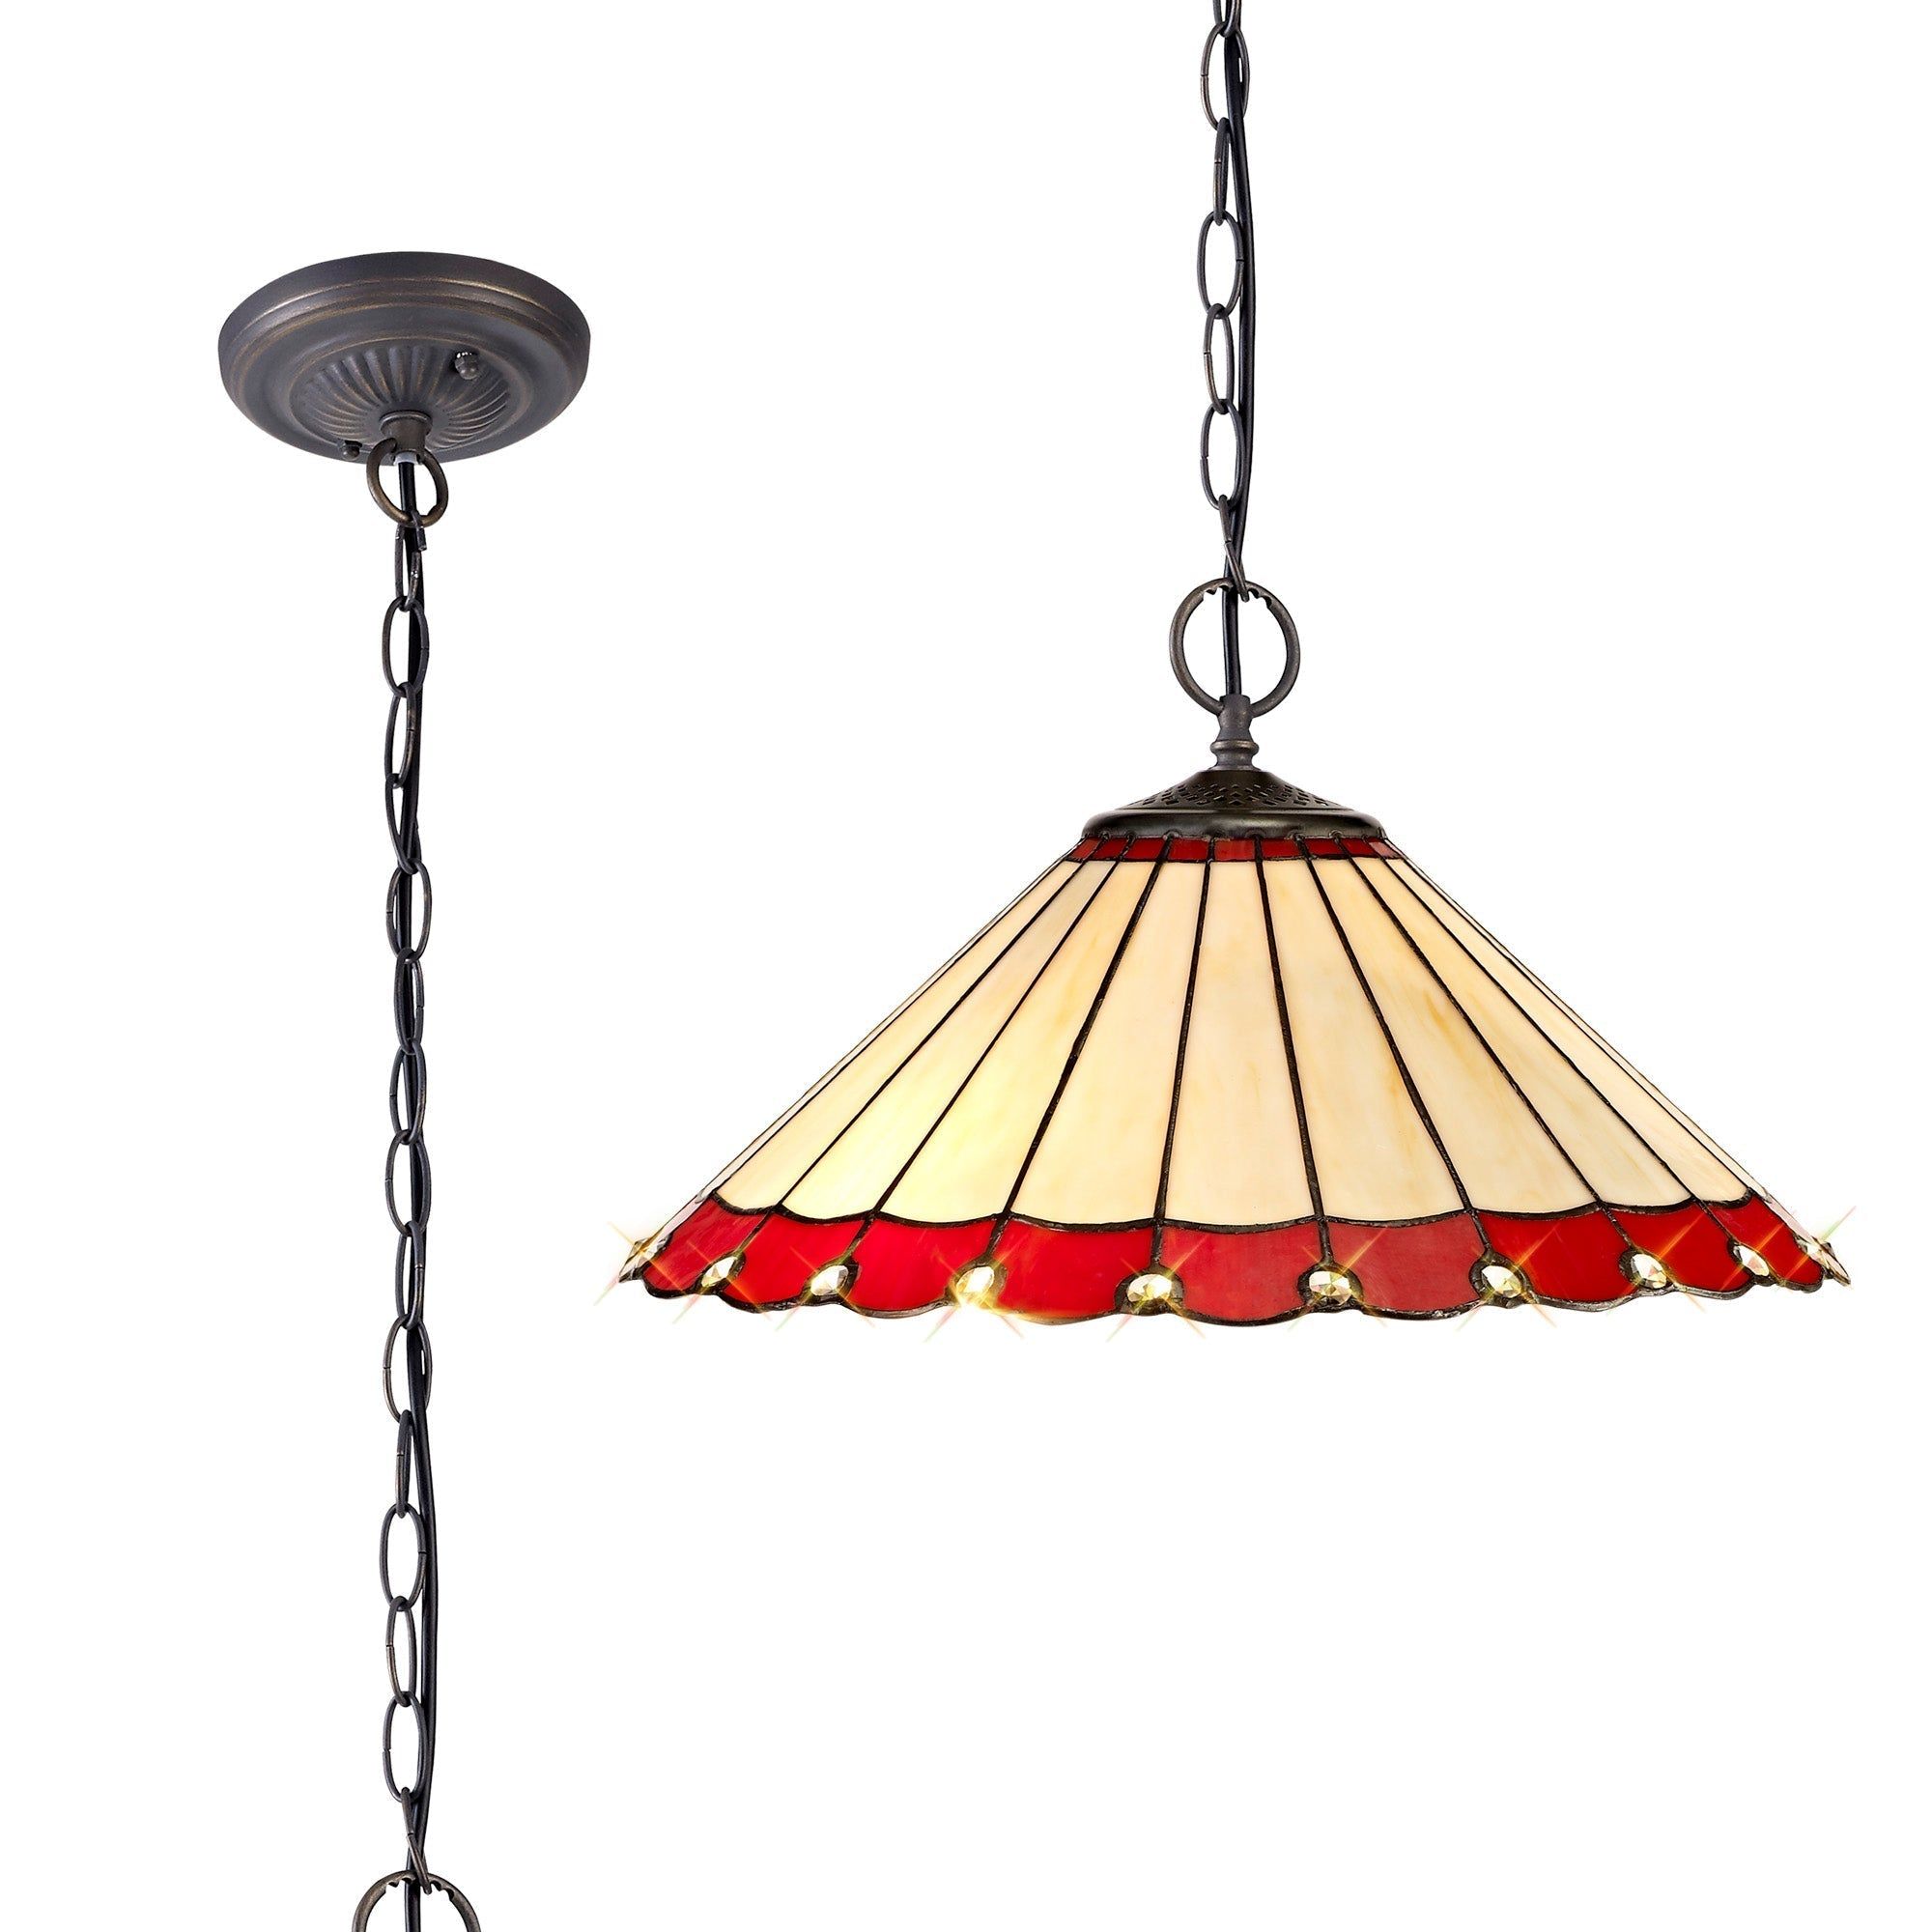 Sheitsr 2 Light Downlighter Pendant E27 With 30cm Tiffany Shade